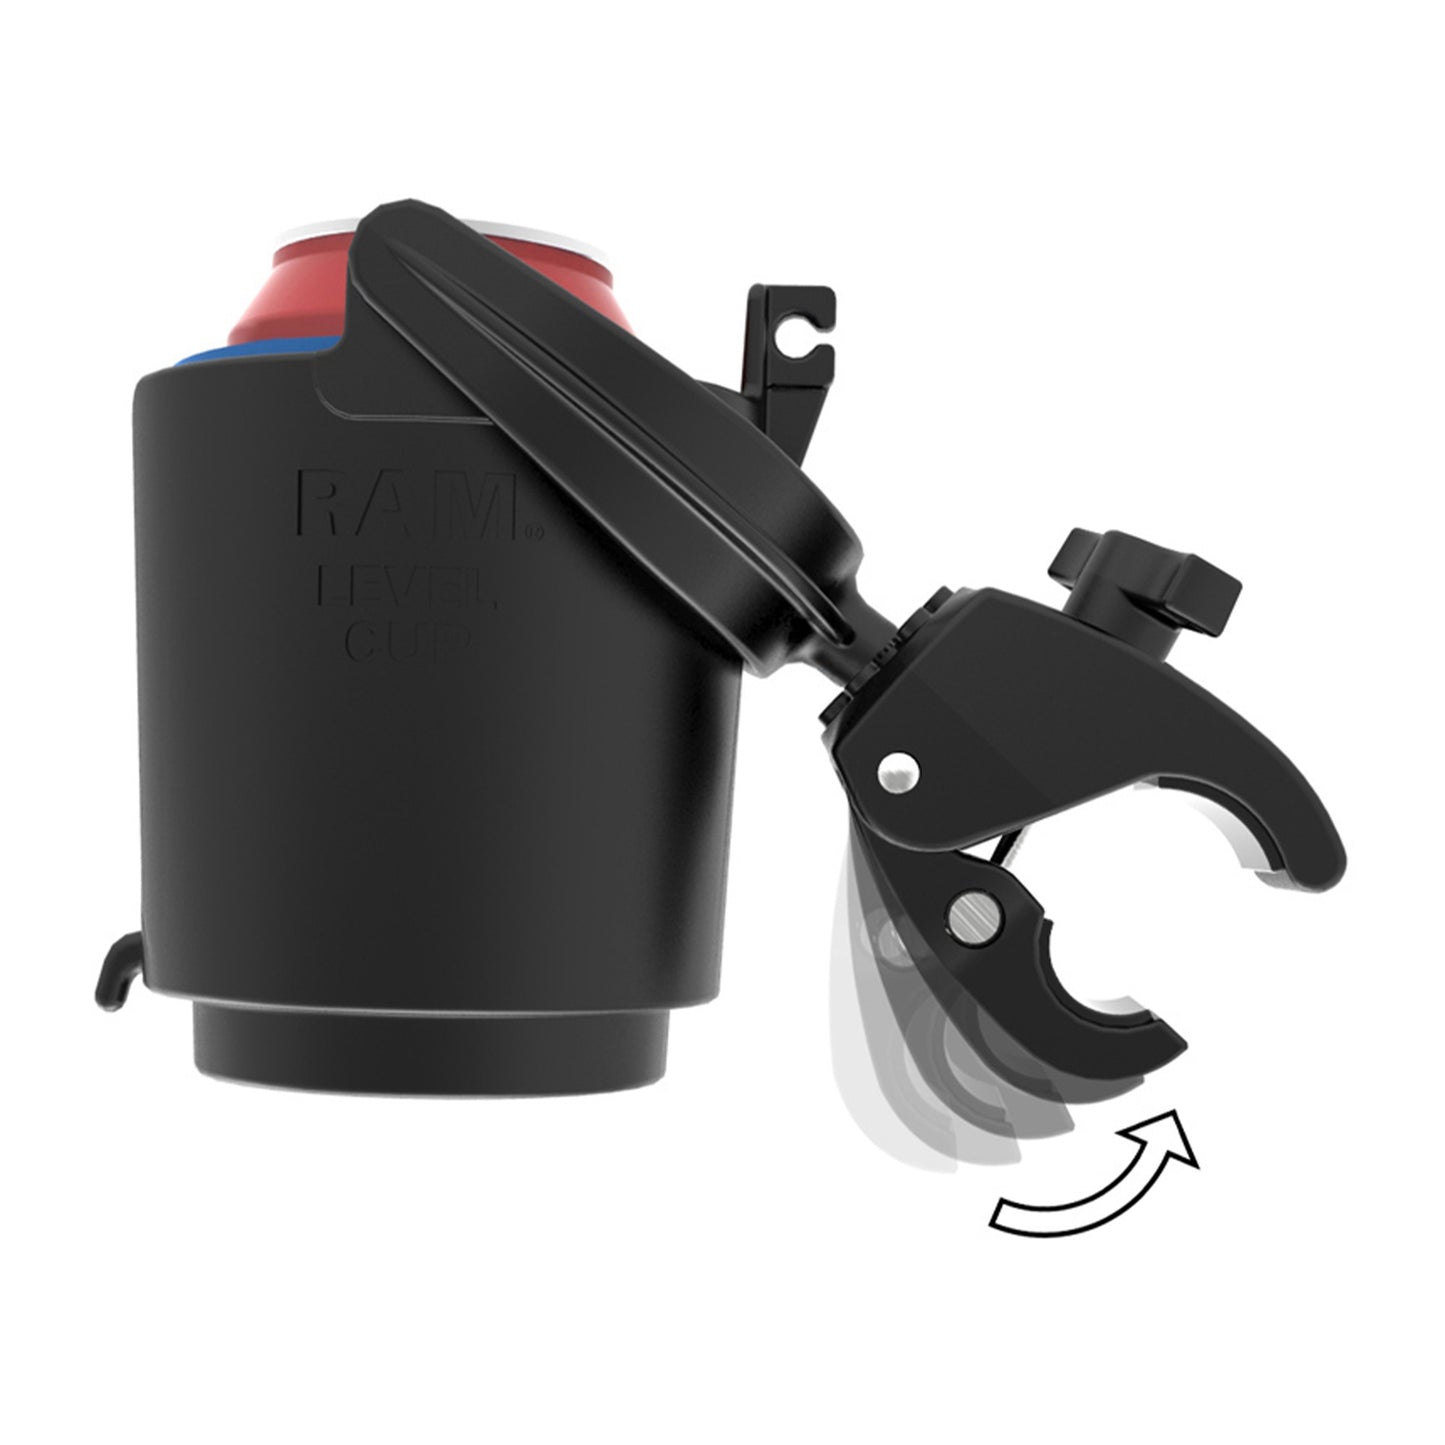 RAM Level Cup 16oz Drink Holder with RAM Tough-Claw Mount - 15-08148